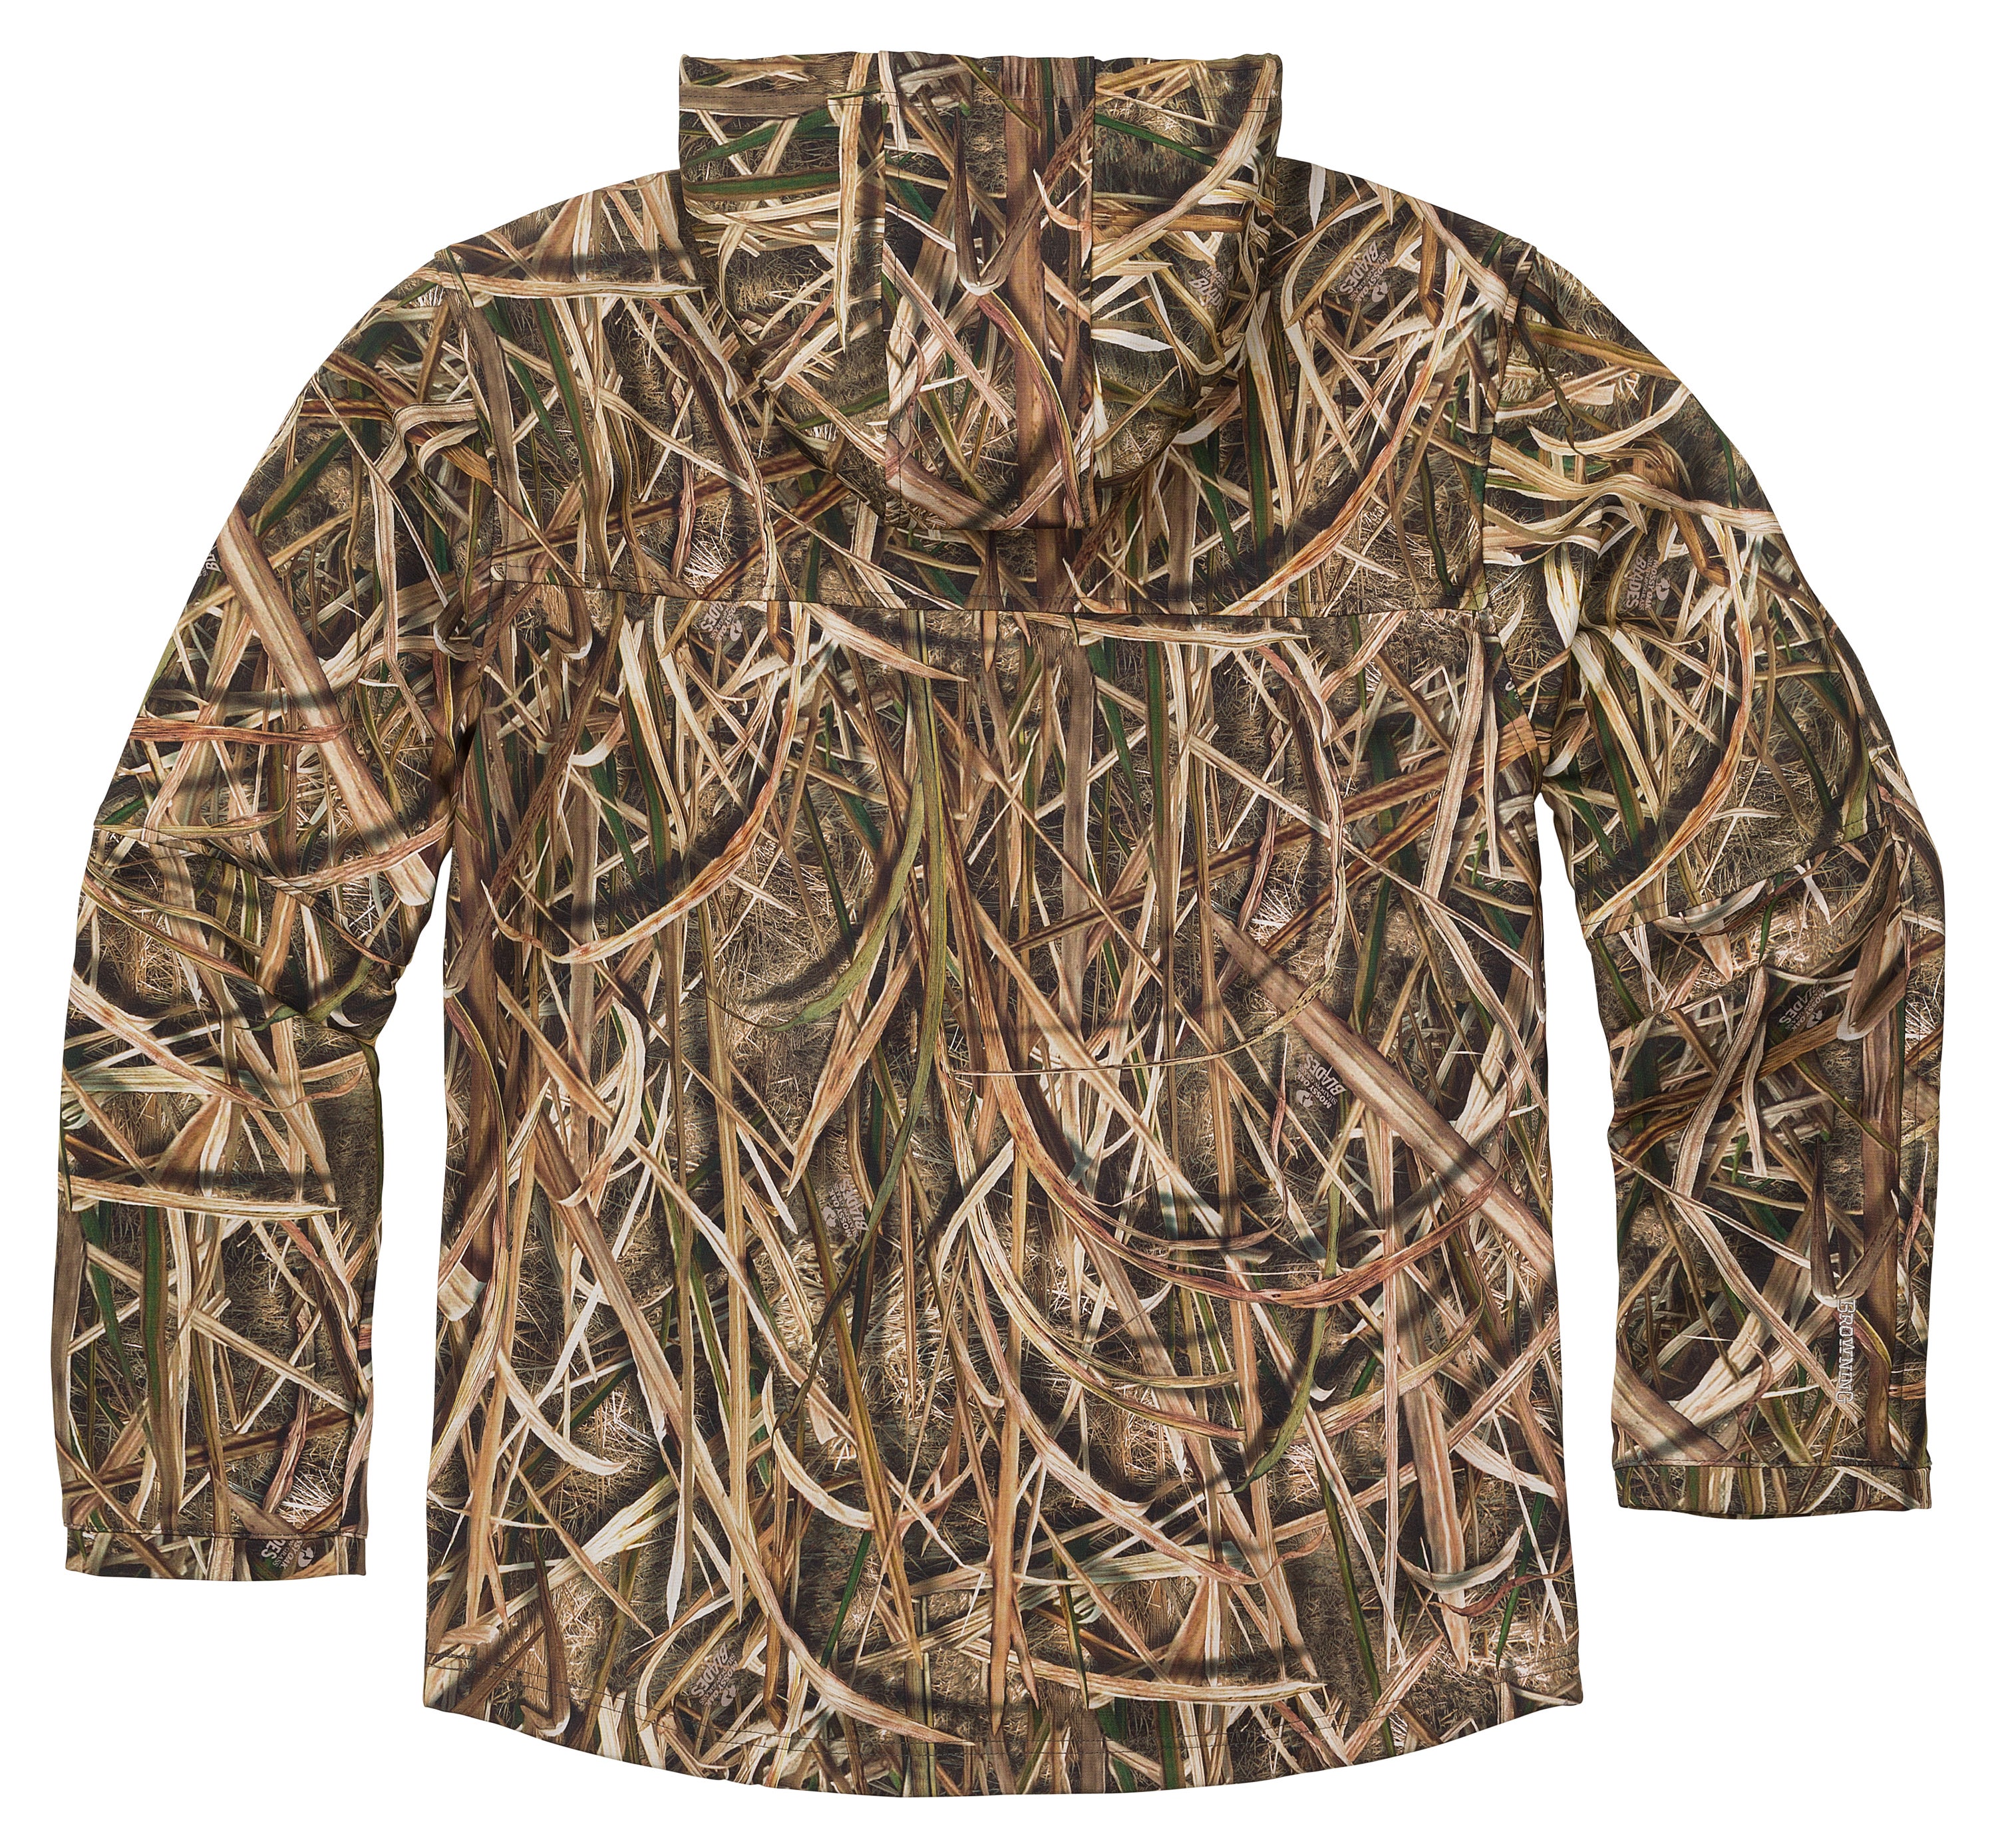 MOSSY OAK BOTTOMLAND CAMO NEW BROWNING WICKED WING HIGH PILE FLEECE HOODIE 